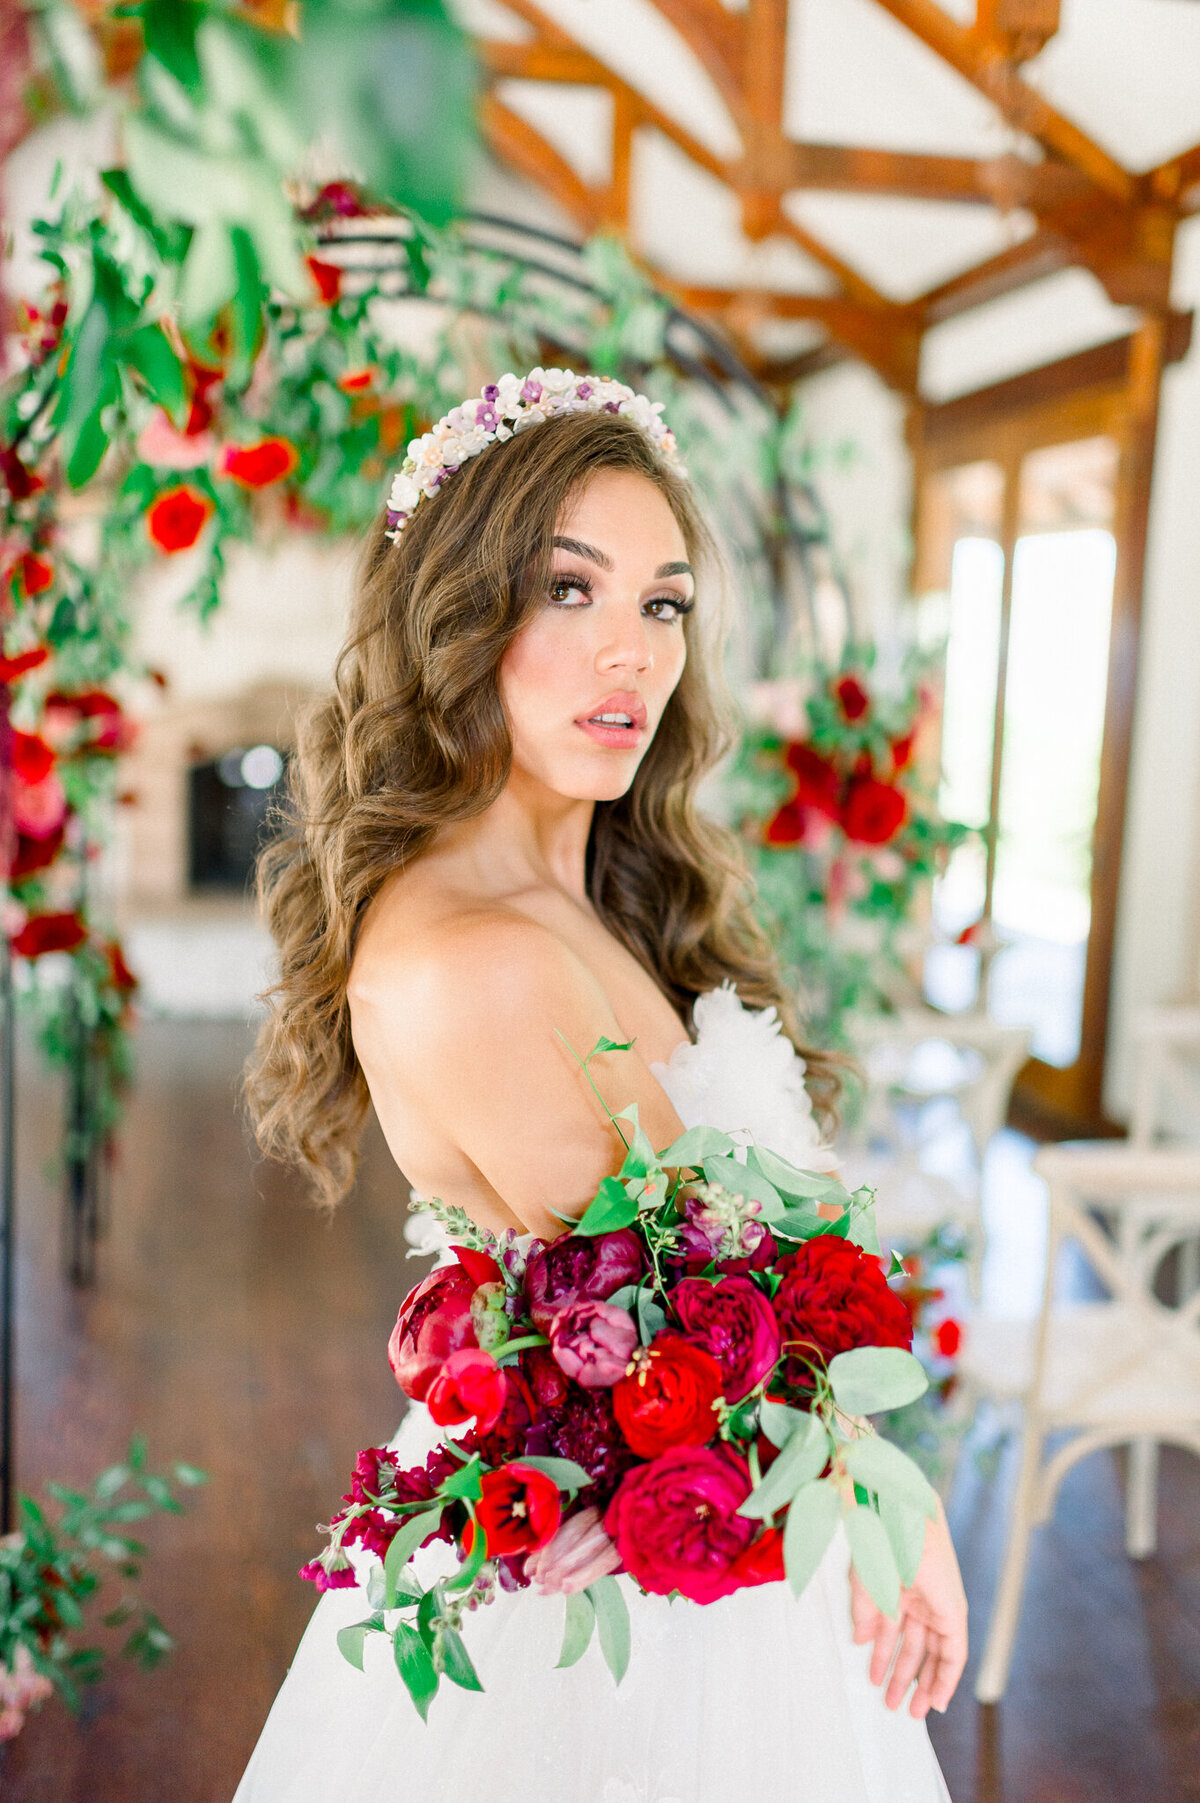 bride with floral crown and red flowers poses for camera by arkansas wedding photographer